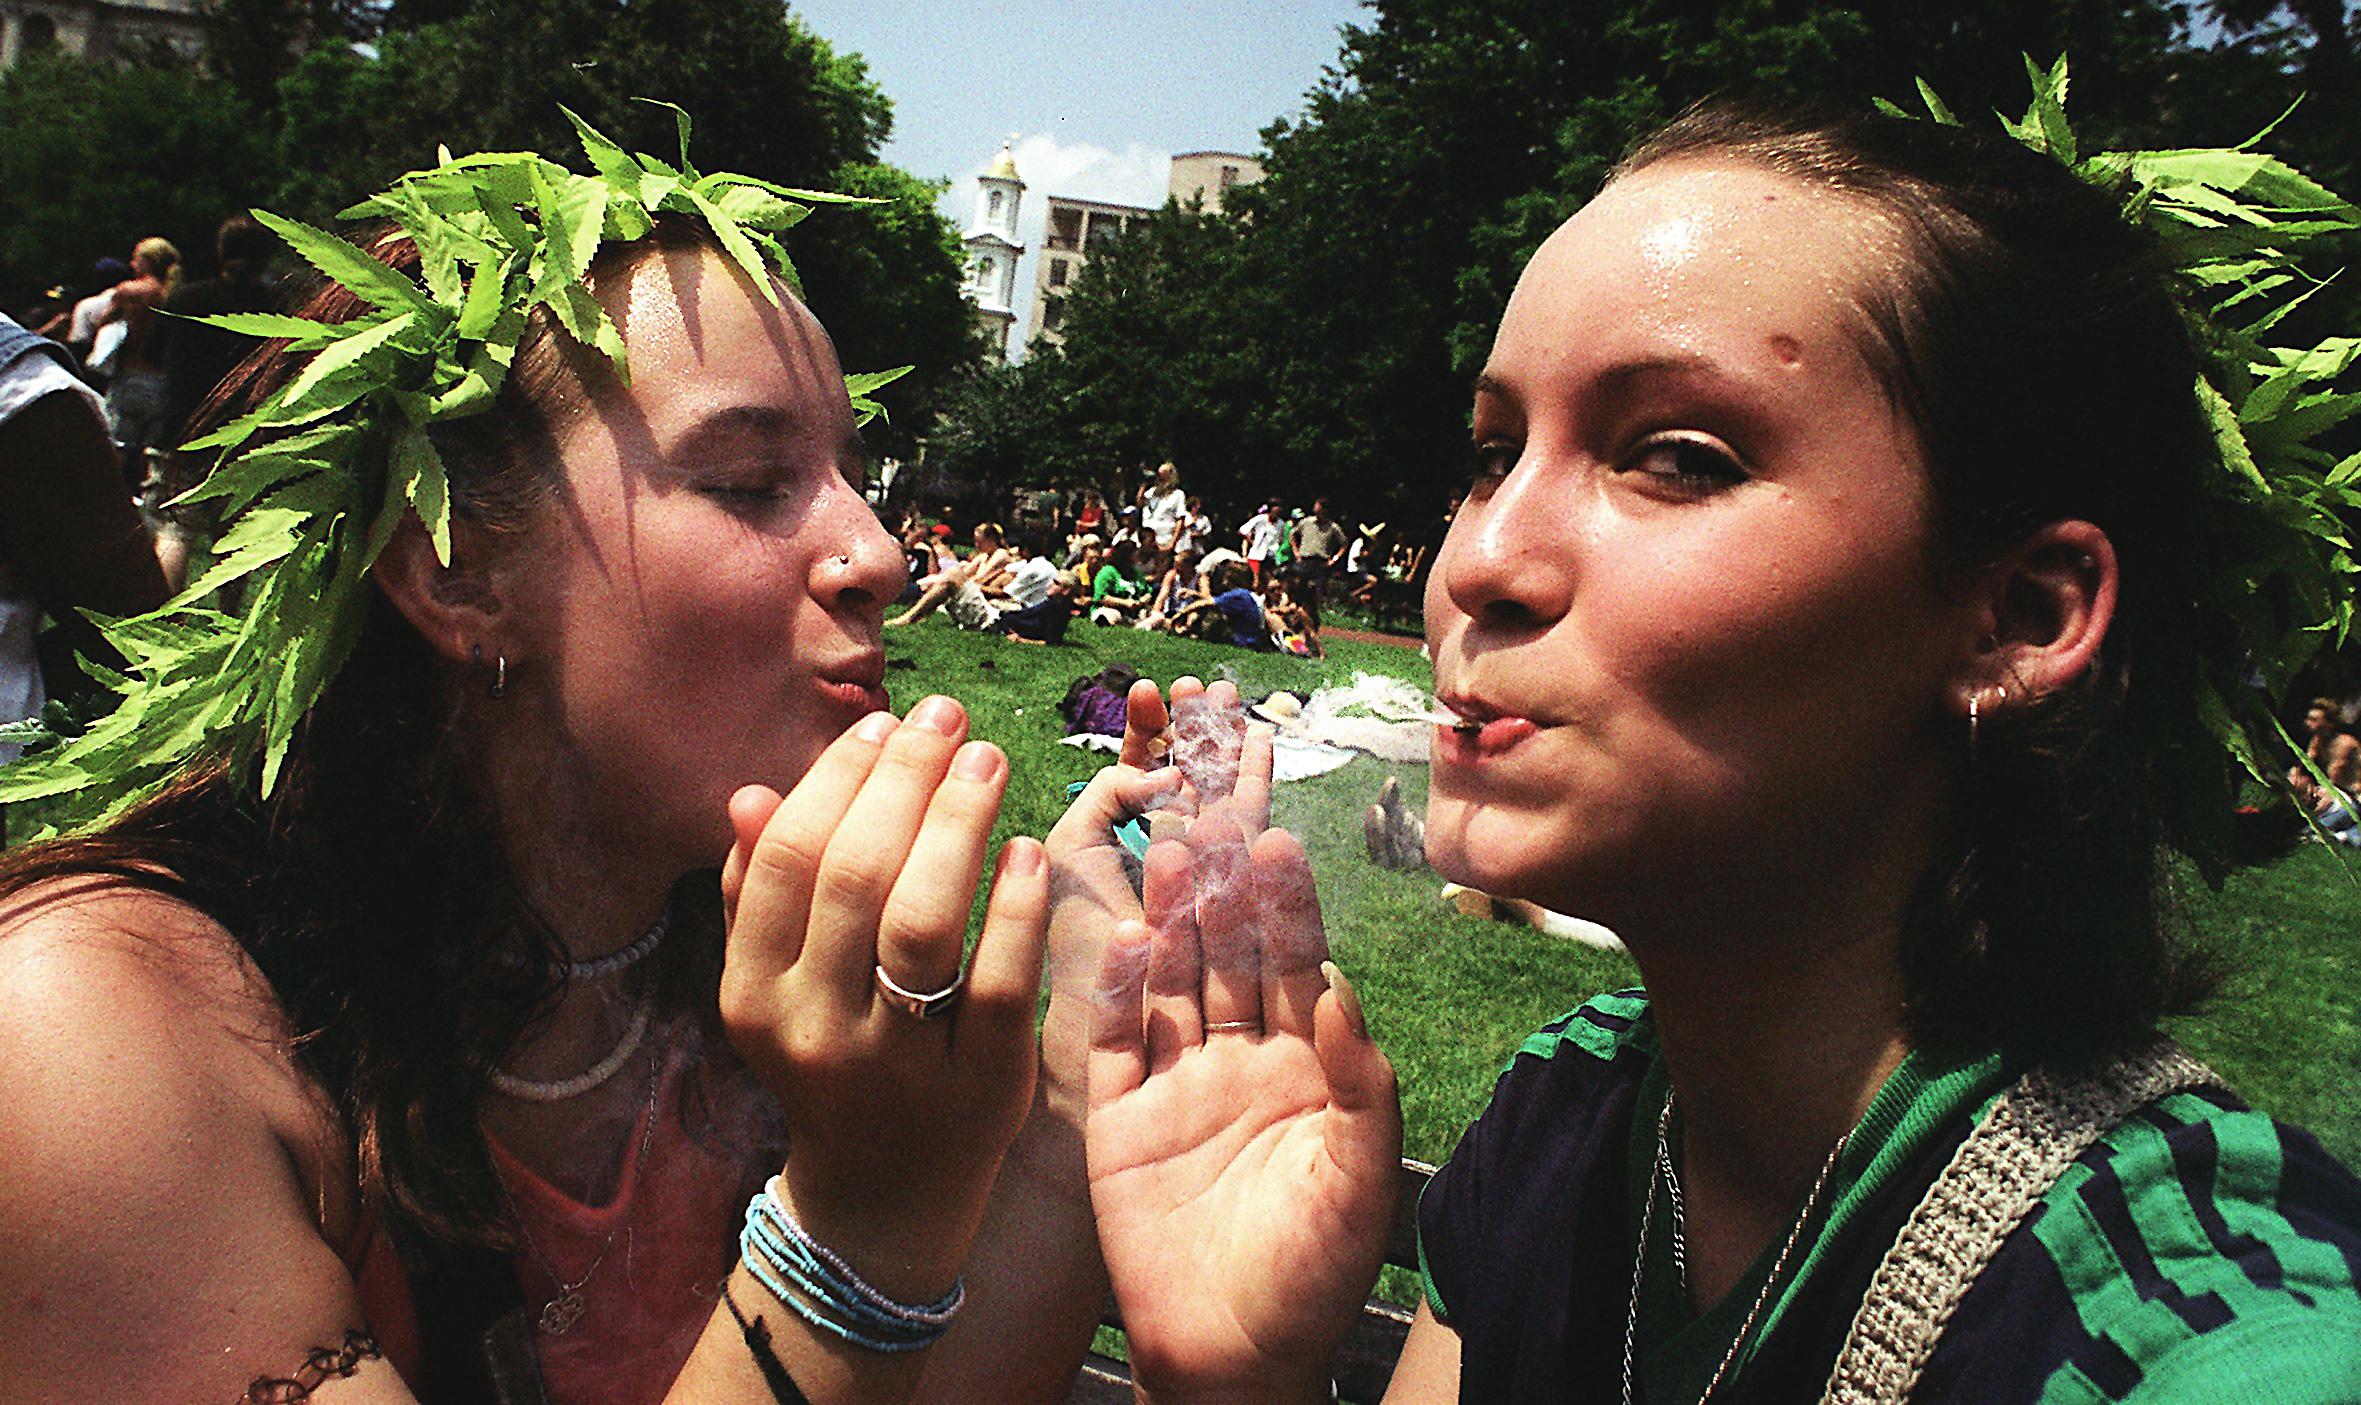 Nearly 40% of Weed Lovers Are Planning to Take the Day Off on 4/20